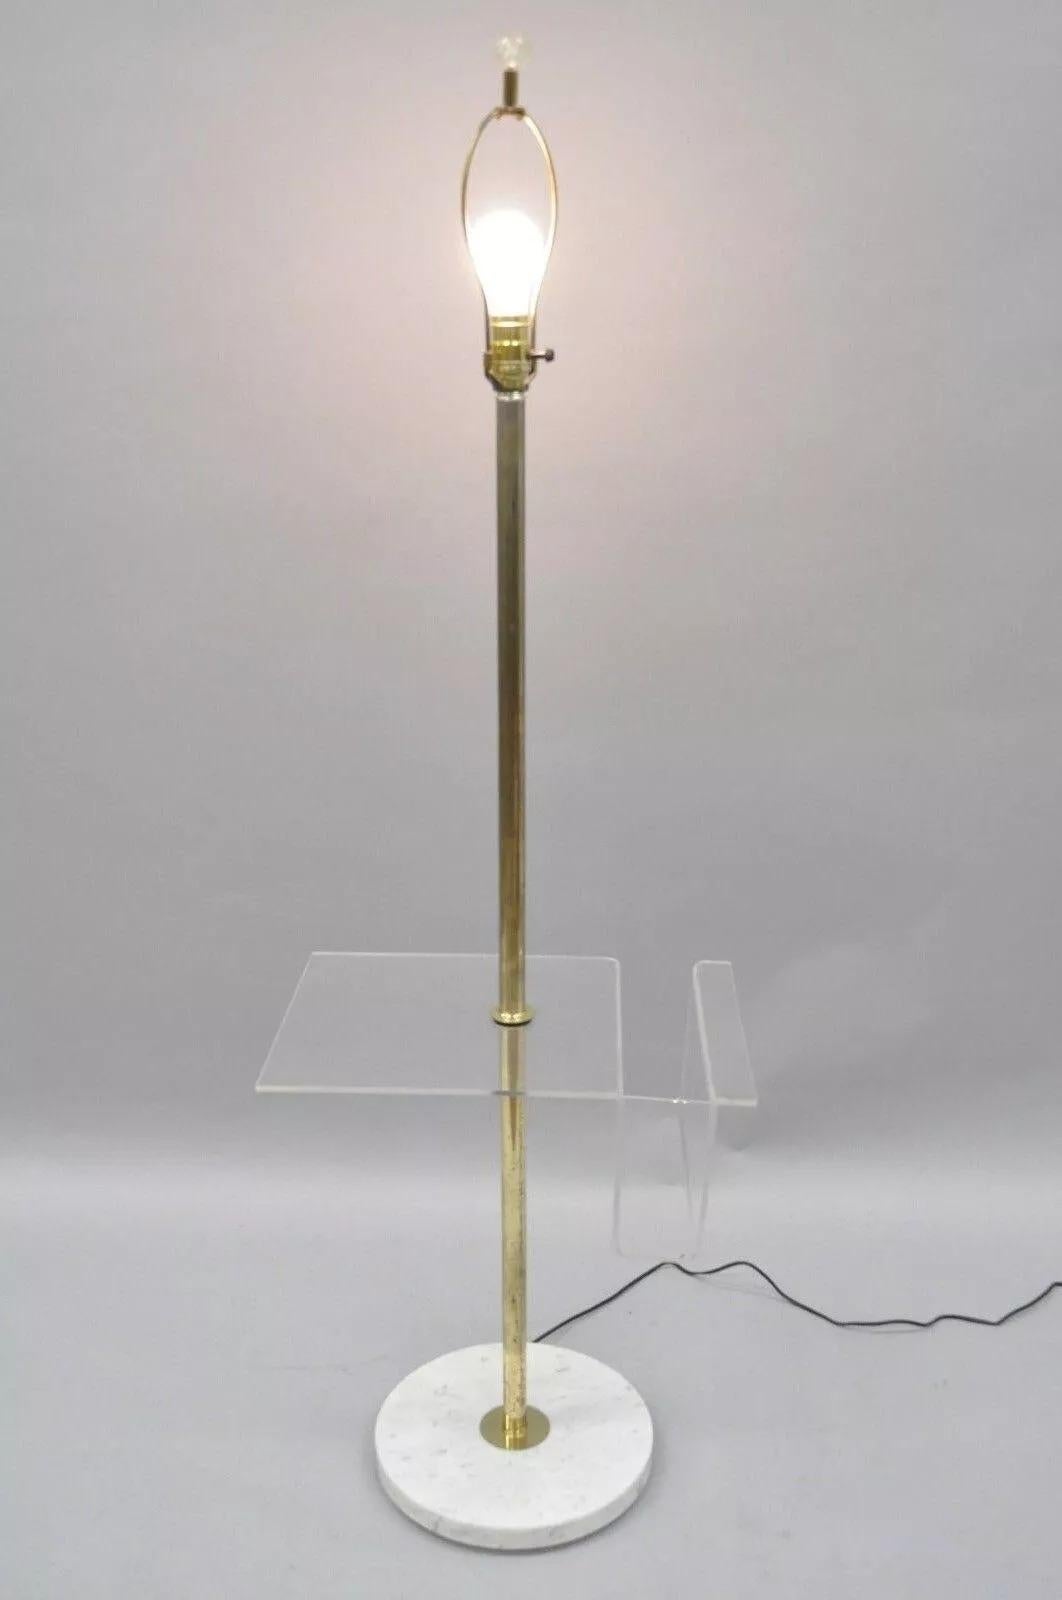 Vintage Mid Century Modern Brass Lucite Marble Floor Lamp with Magazine Table Rack. Item features a lucite magazine/letter holder, brass rods, marble base, very nice vintage item. Circa 1960's. Measurements: 56